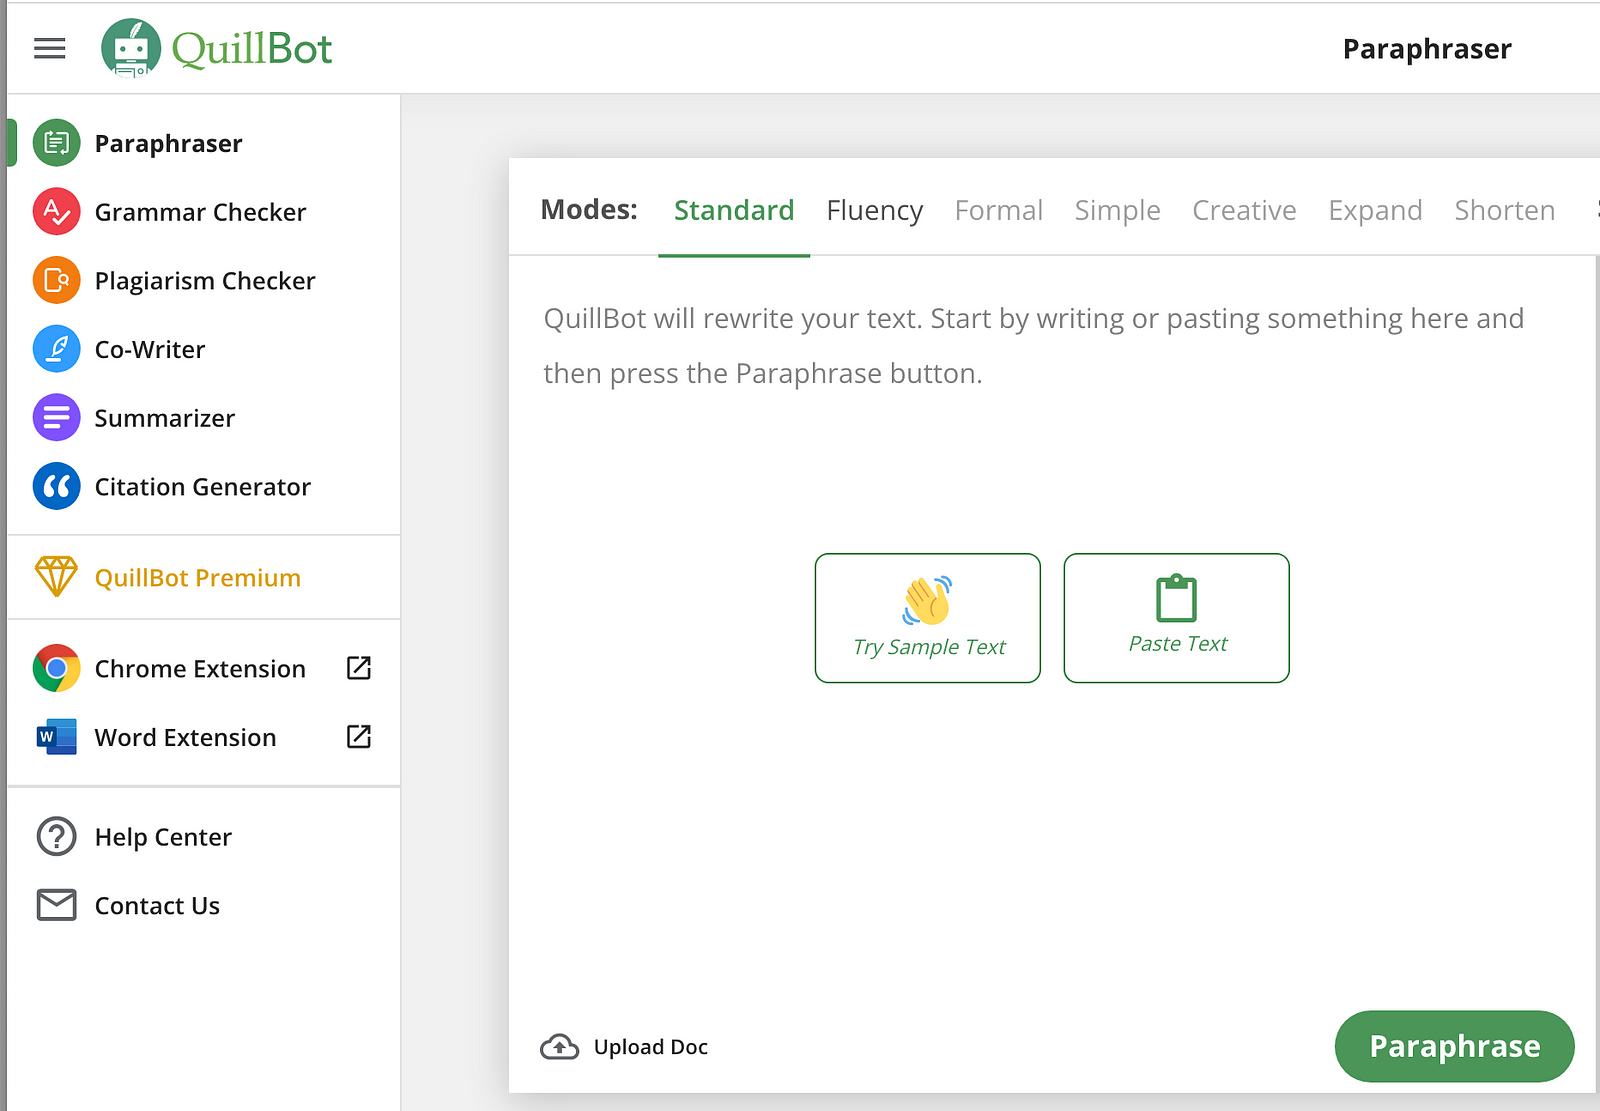 Use QuillBot to rewrite existing content to save time.